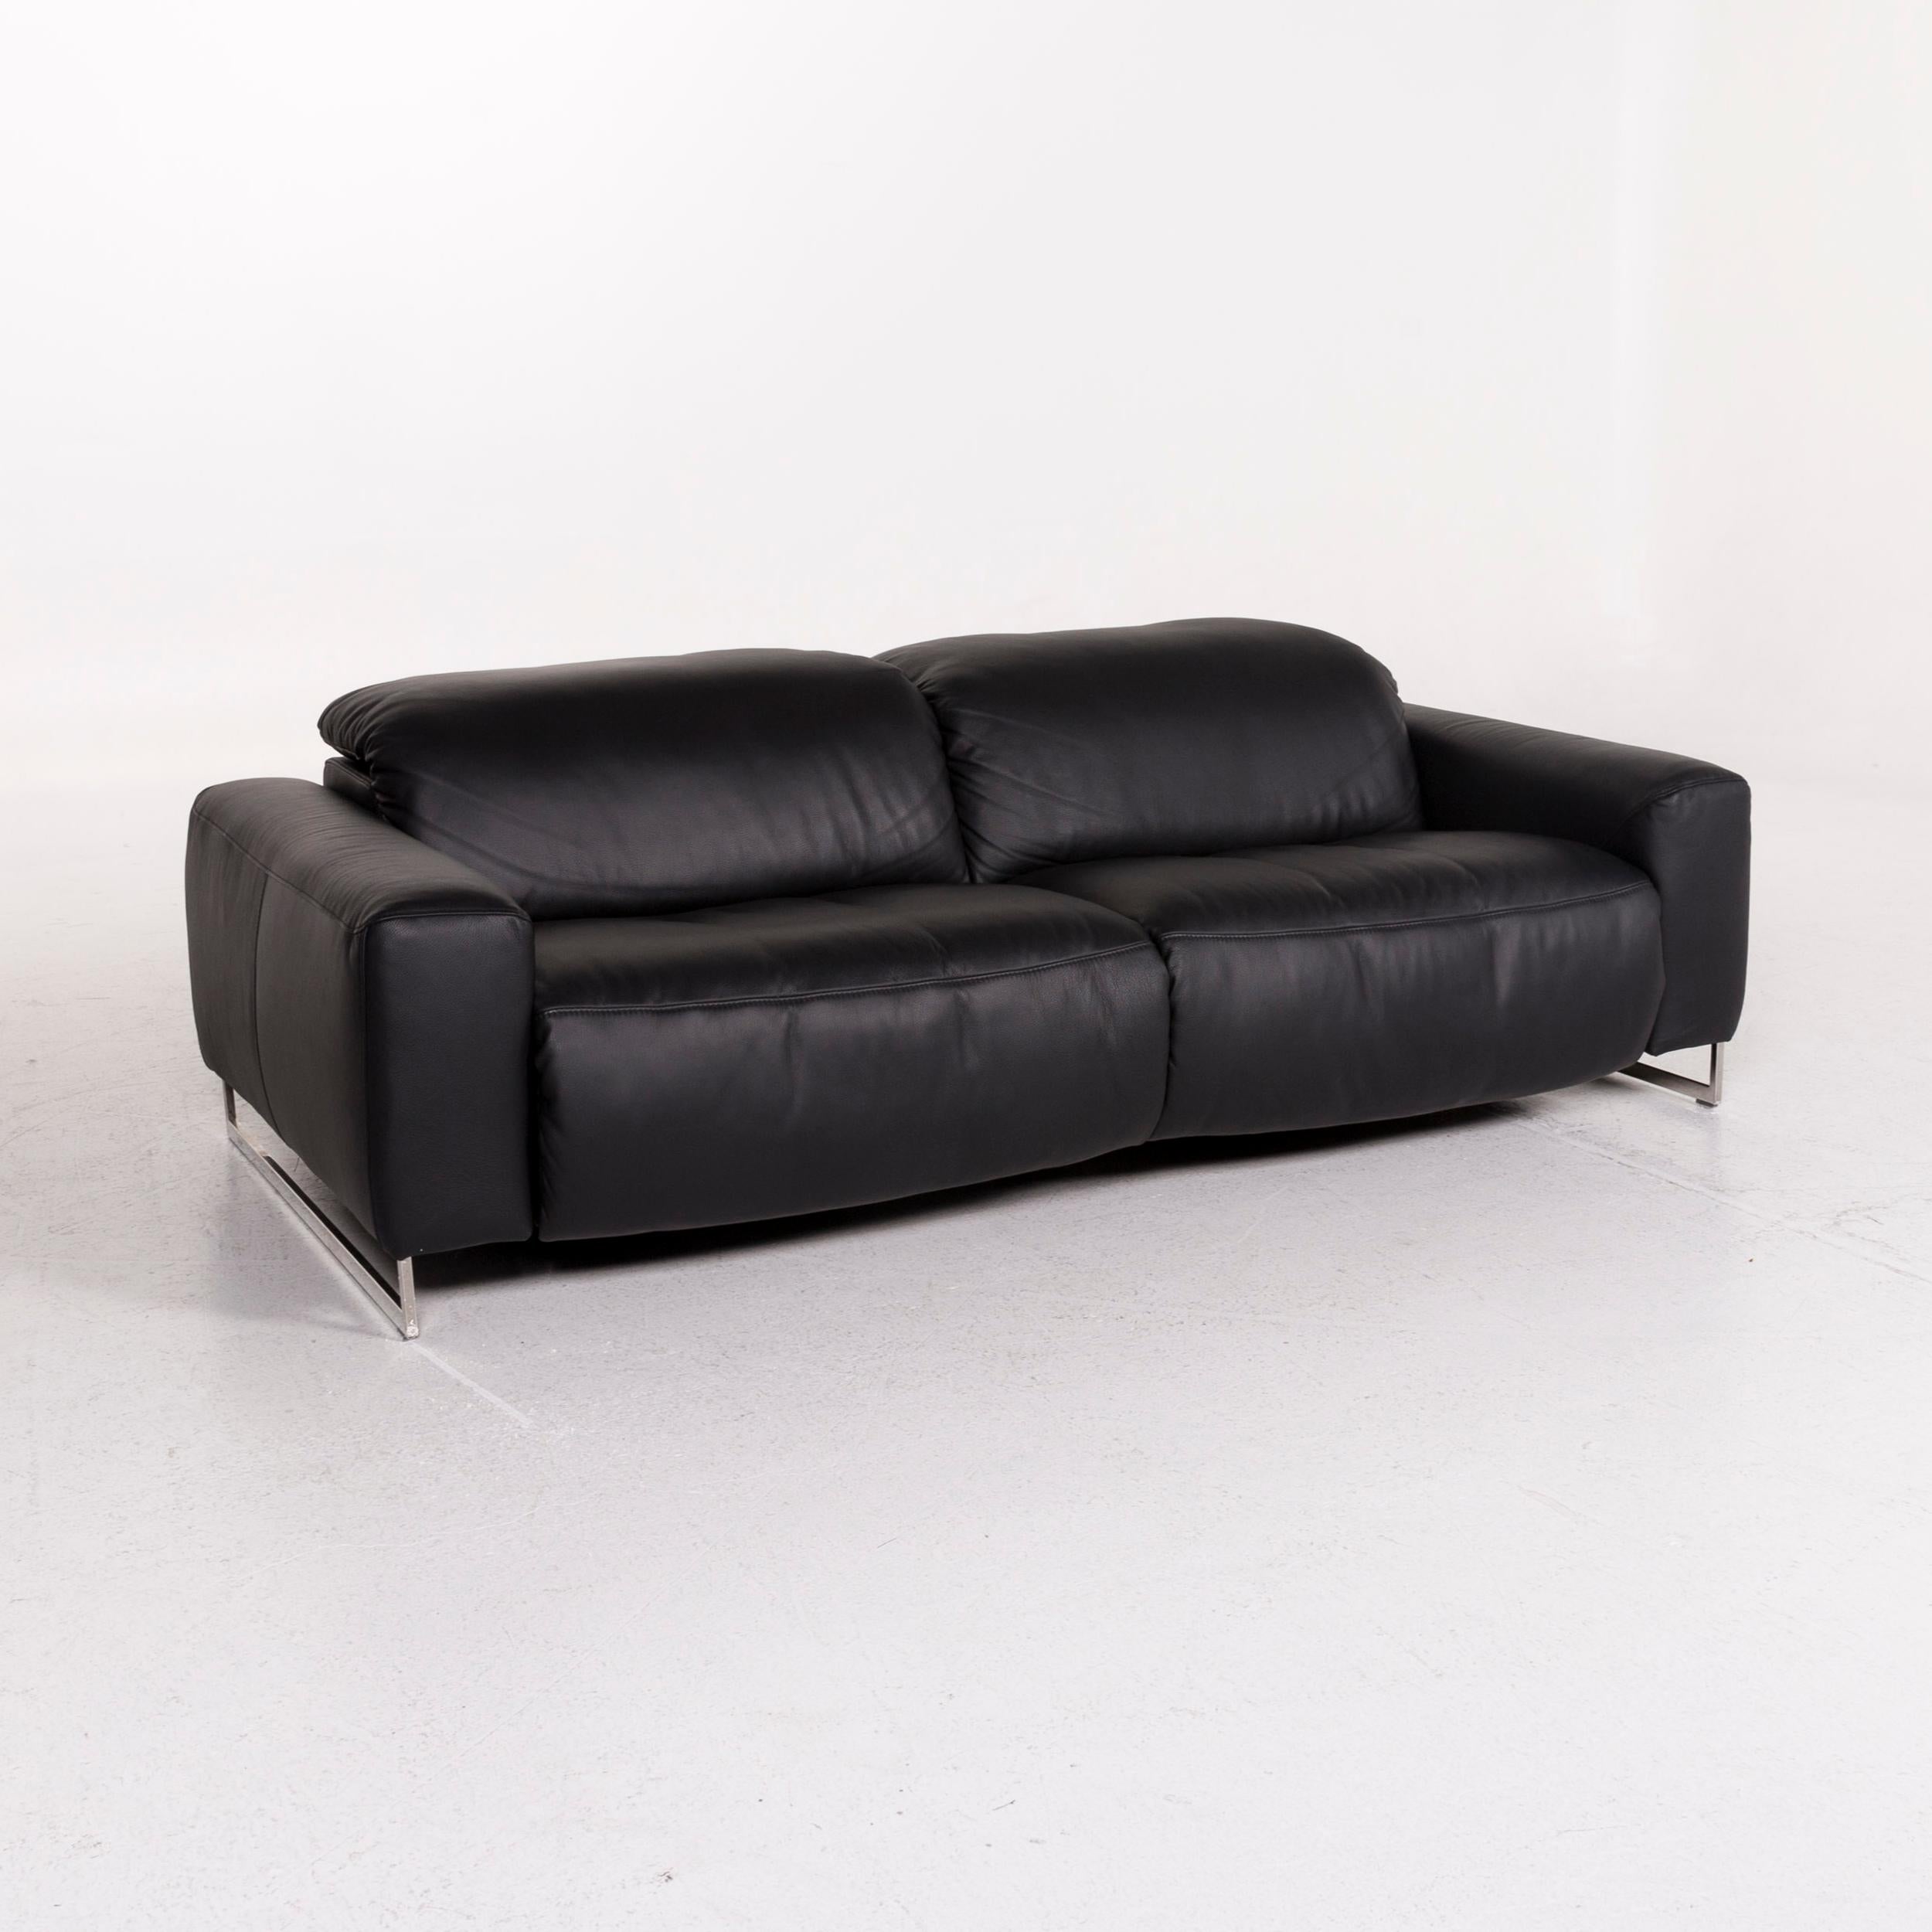 Polish Joop Leather Sofa Black Two-Seat Function Relax Function Couch For Sale